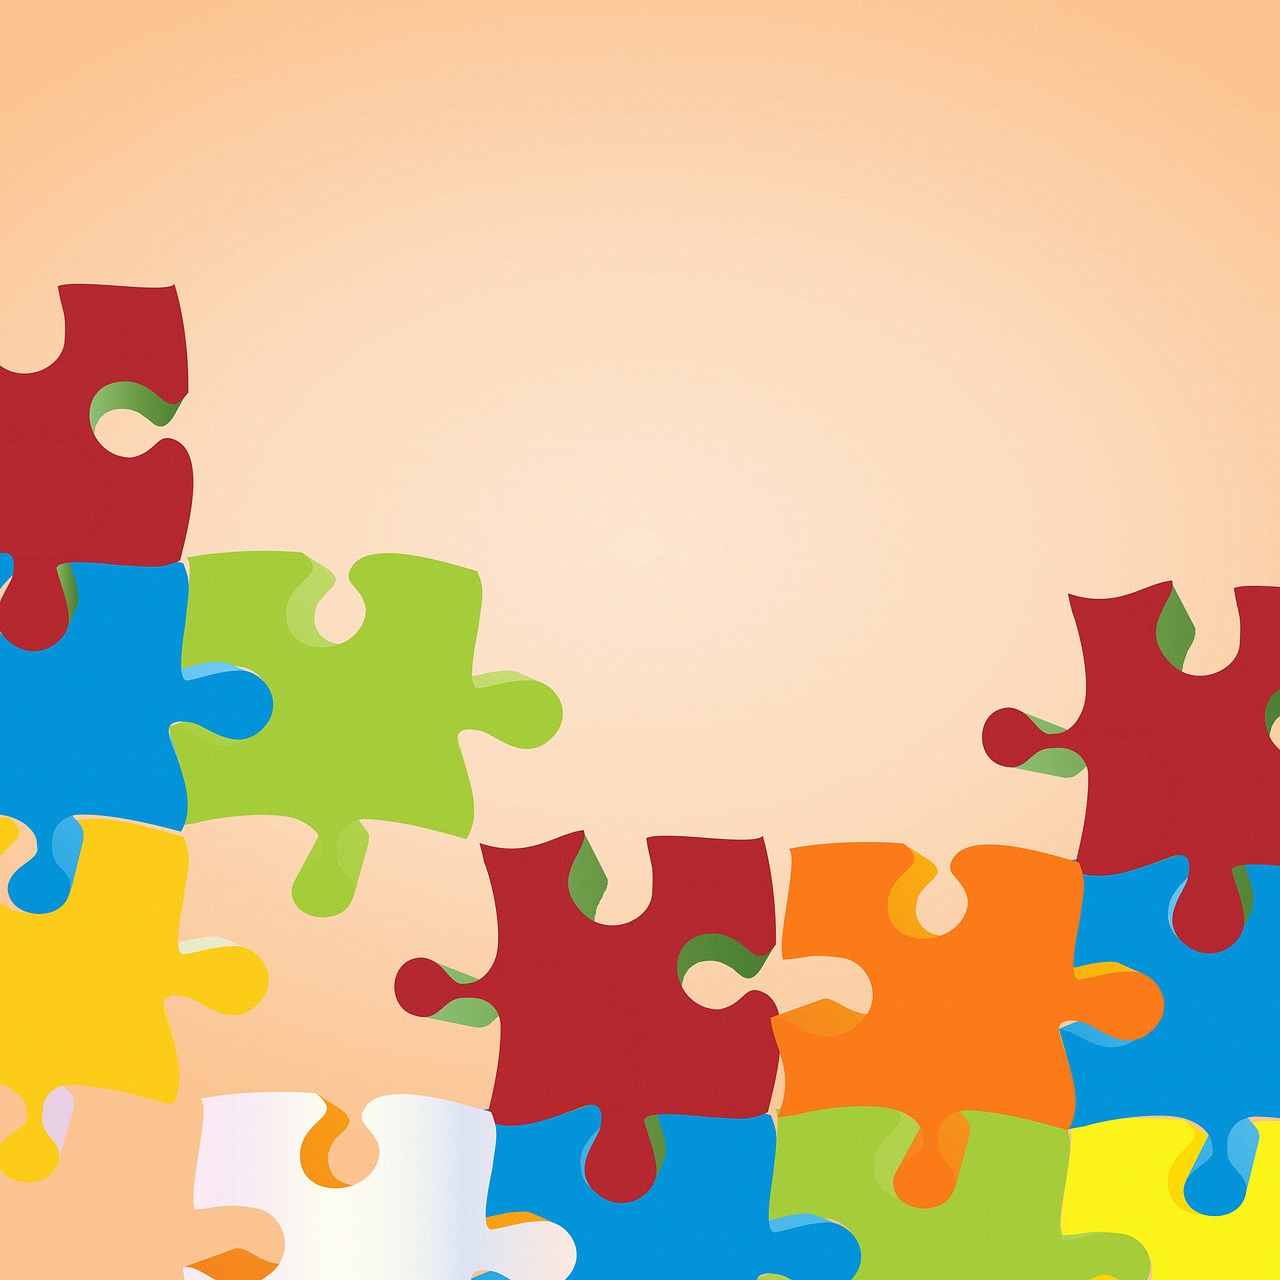 a group of puzzle pieces sitting on top of each other, a jigsaw puzzle, conceptual art, warm color scheme art rendition, colorful palette illustration, corners, smooth in _ the background